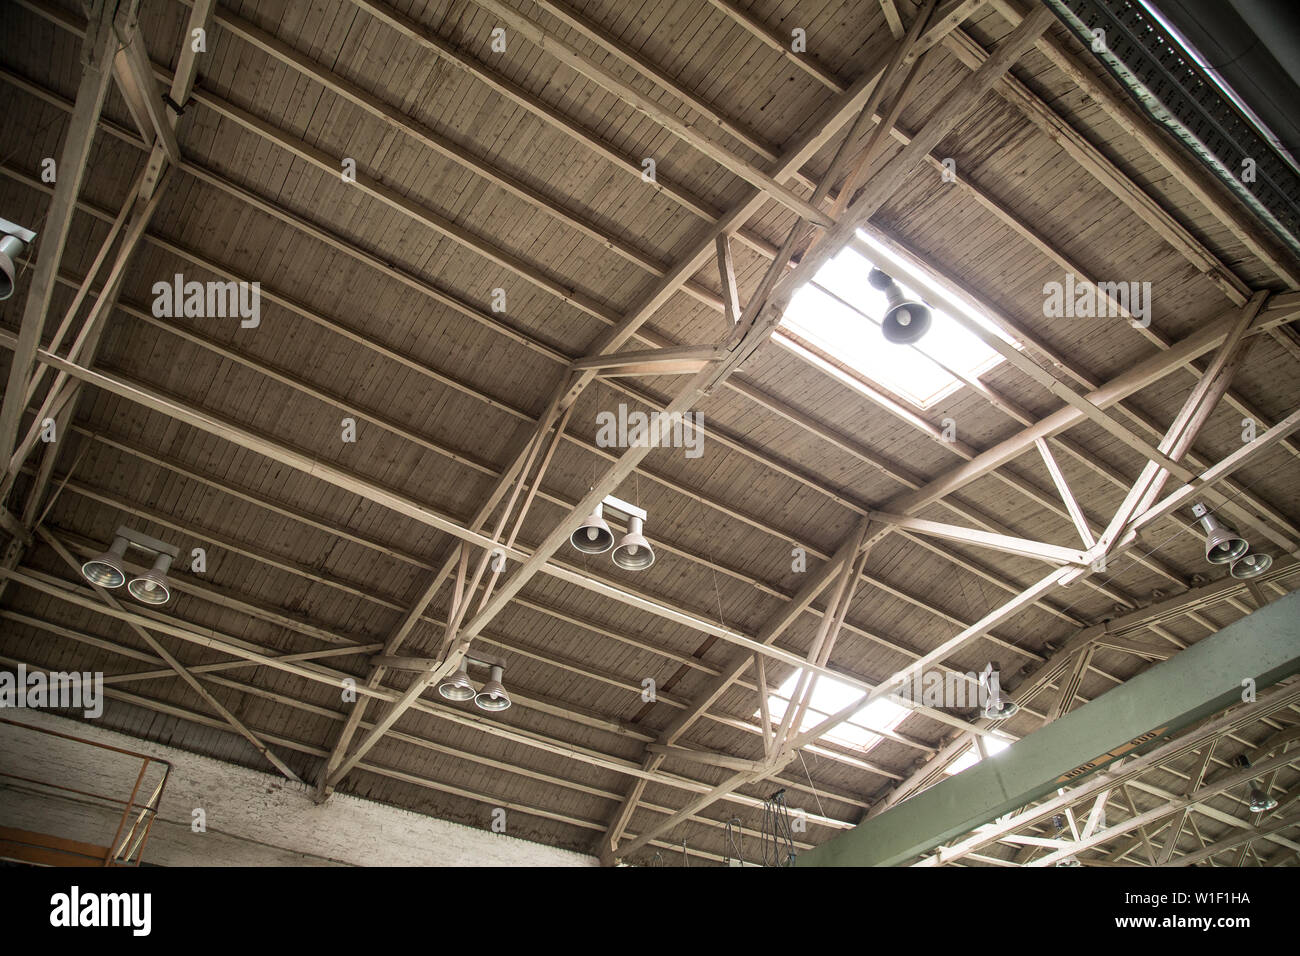 ceiling with windows in factory hall Stock Photo